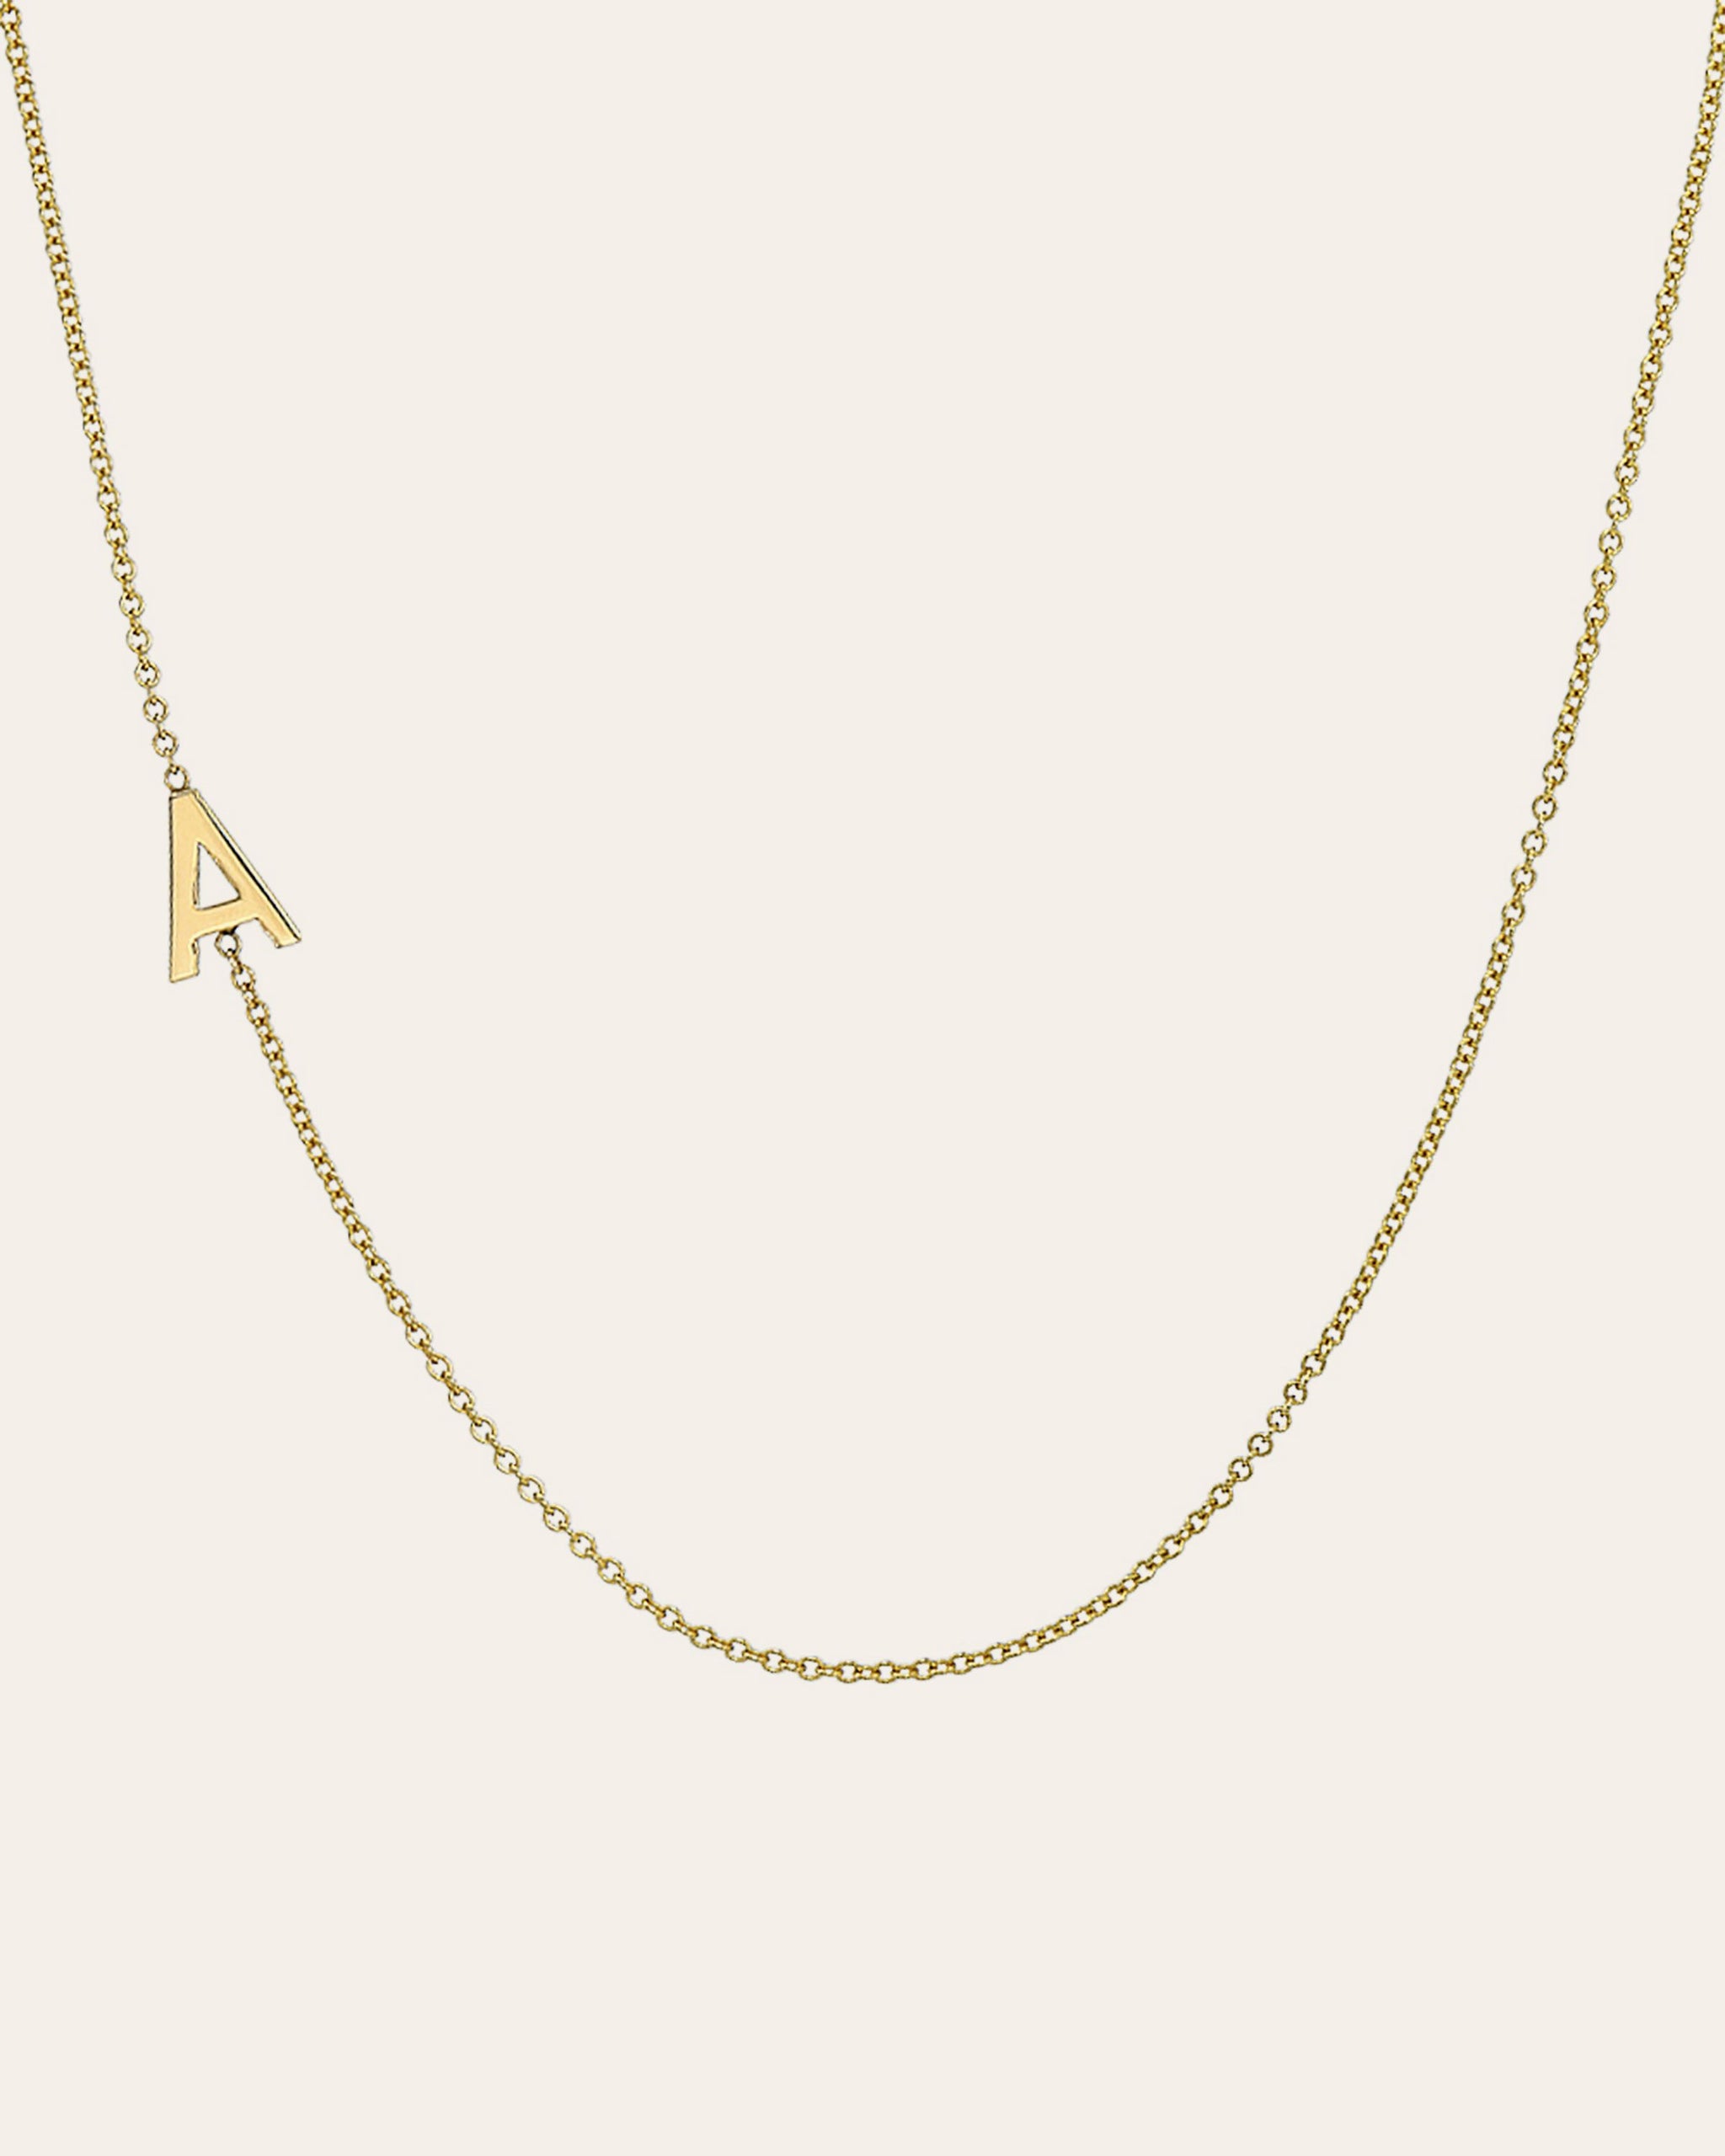 Small Initial Letter Y Pendant & Chain Necklace in Solid 14K Rose, White, & Yellow Gold, Women's, Grey Type